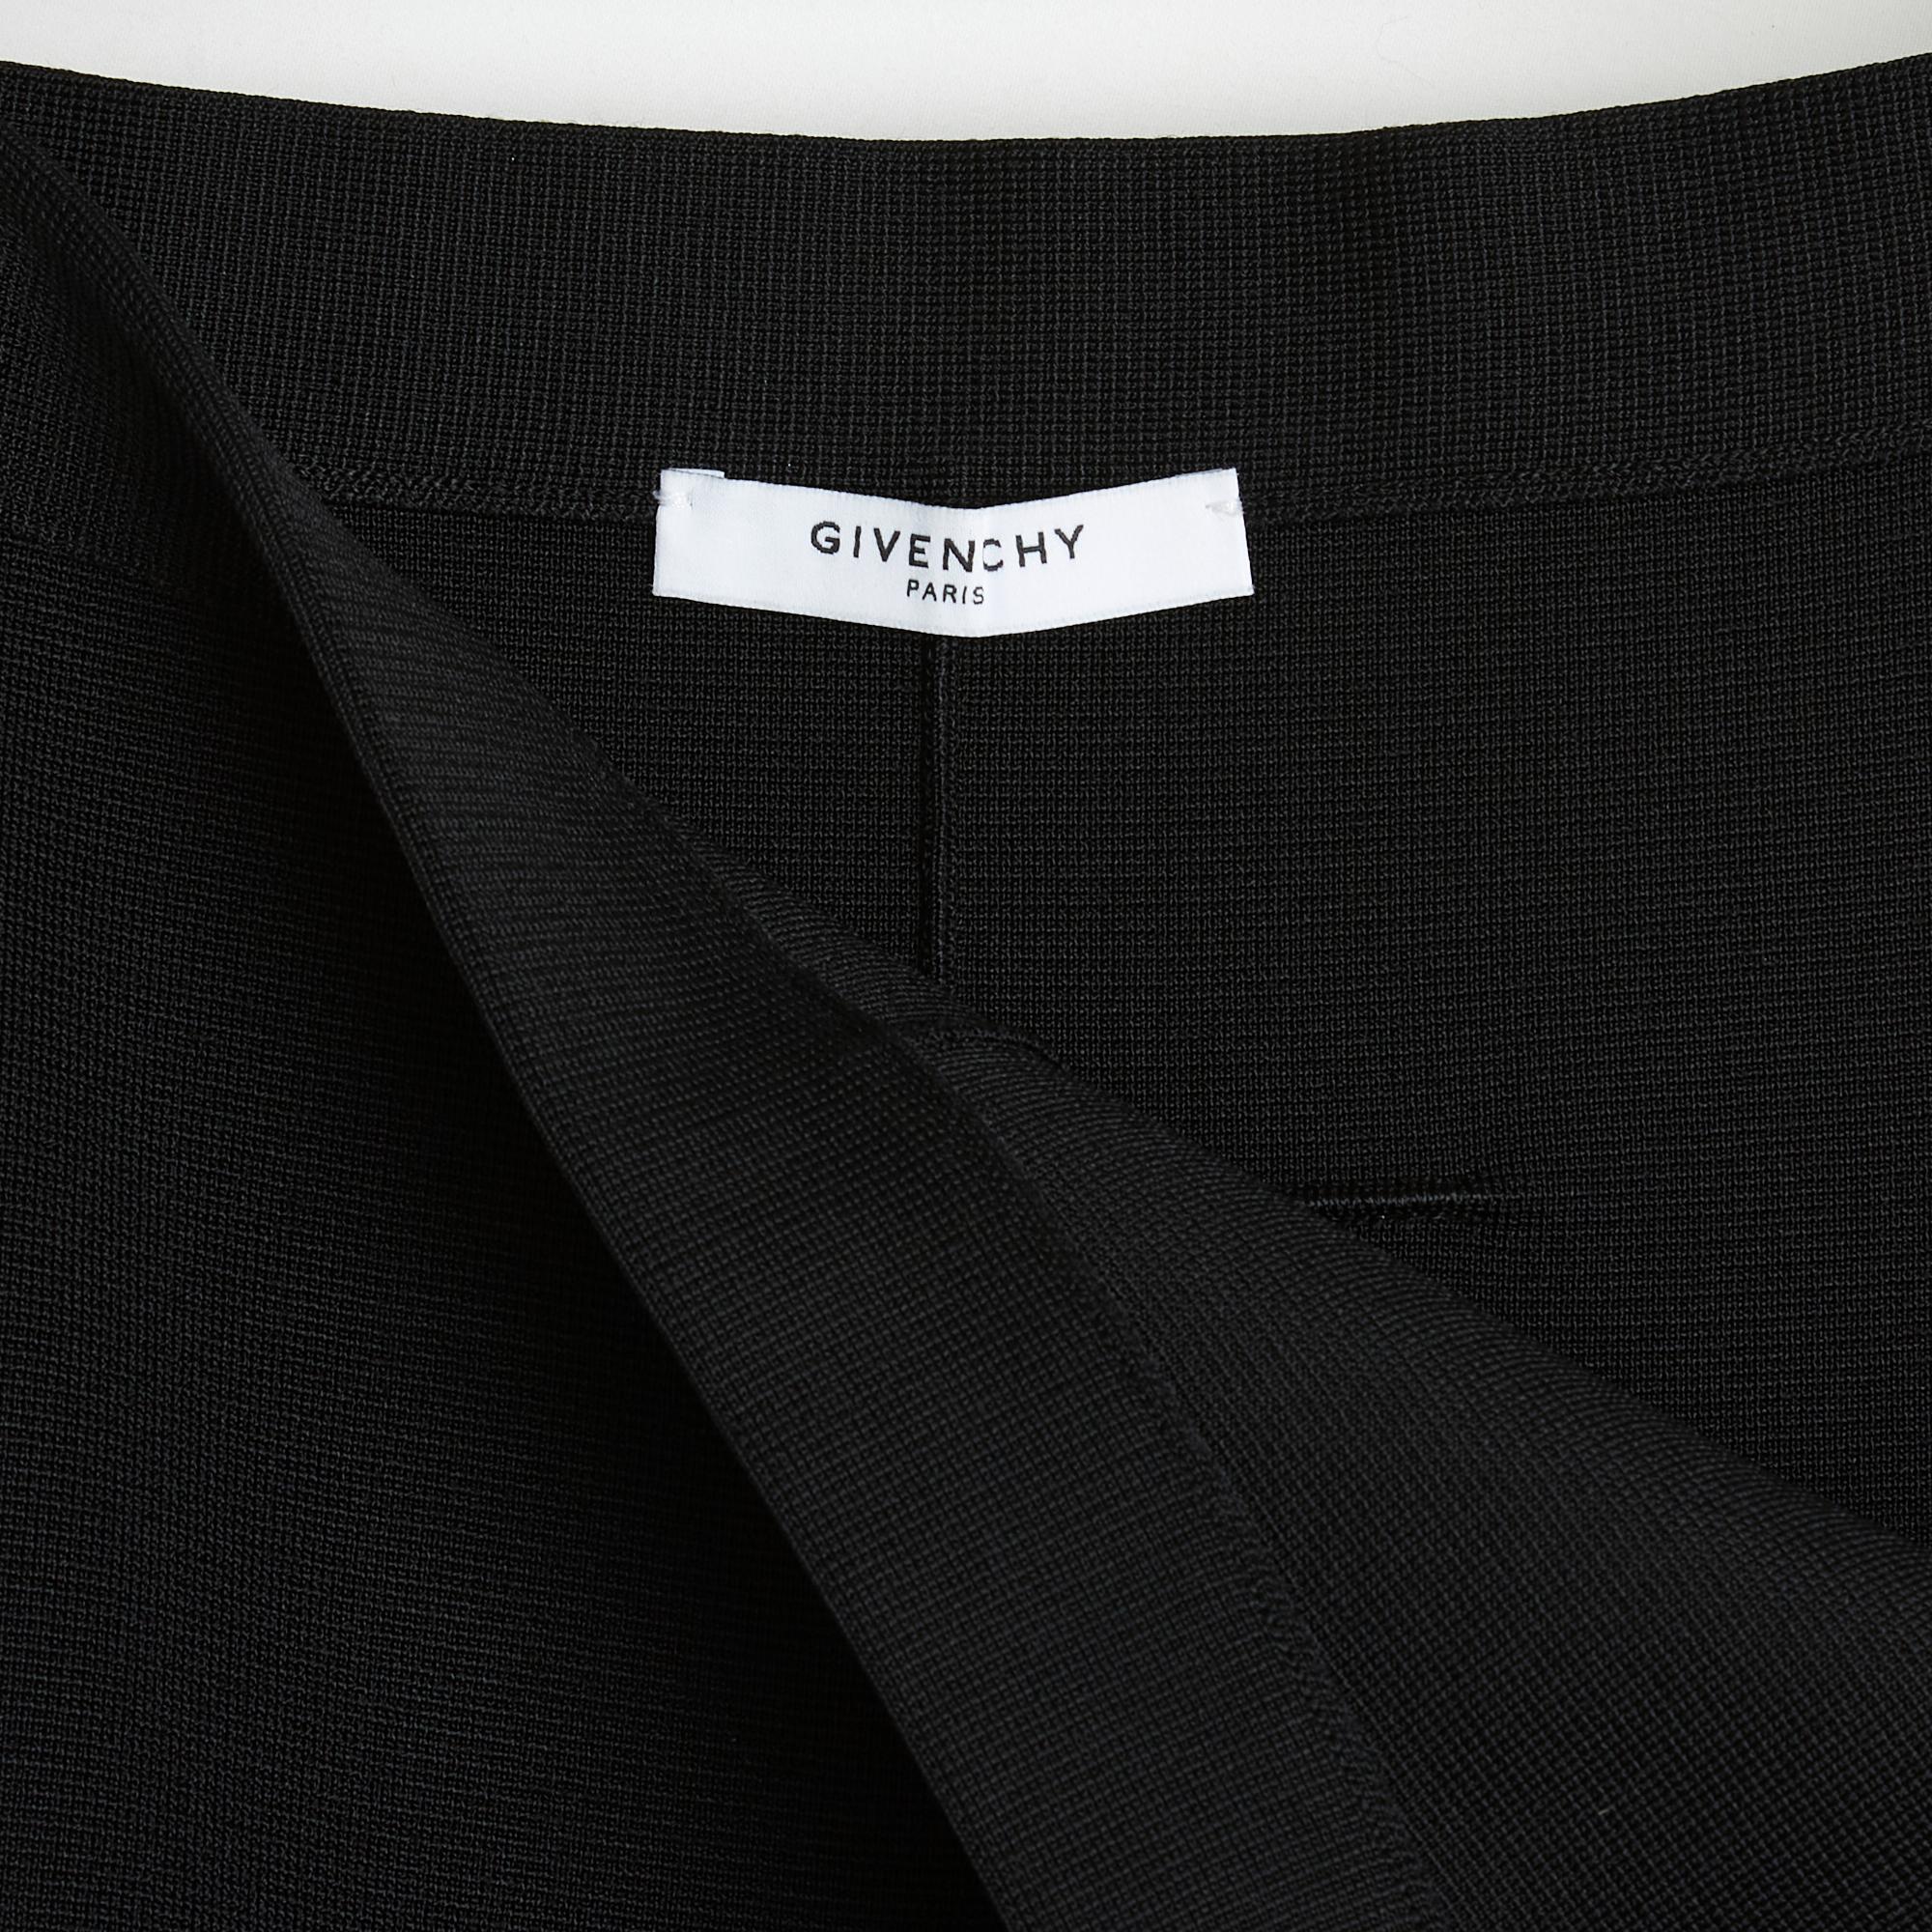 Givenchy skirt by Riccardo Tisci, straight in thick black viscose and wool knit, long slit on the front, zip and hook closure on the side. No more composition label or size but the measurements indicate a 36FR: waist 36 cm, length 76 cm. The skirt